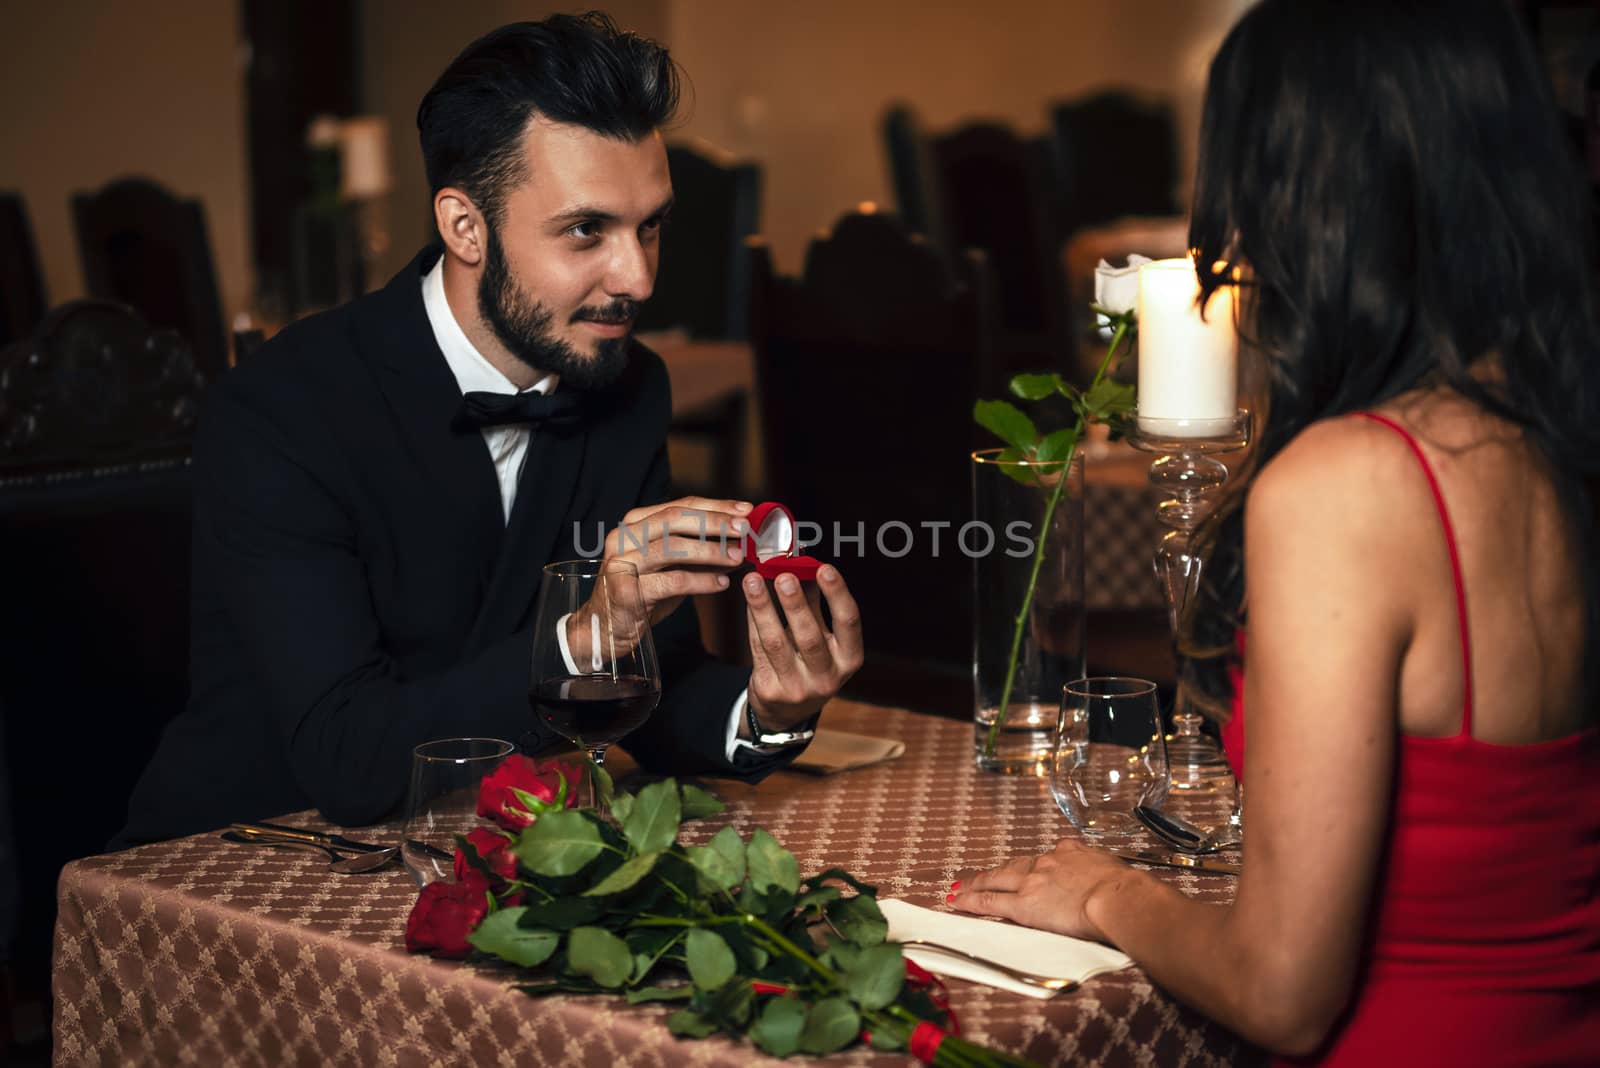 Man surprising woman with engagement ring at the restaurant during romantic dinner